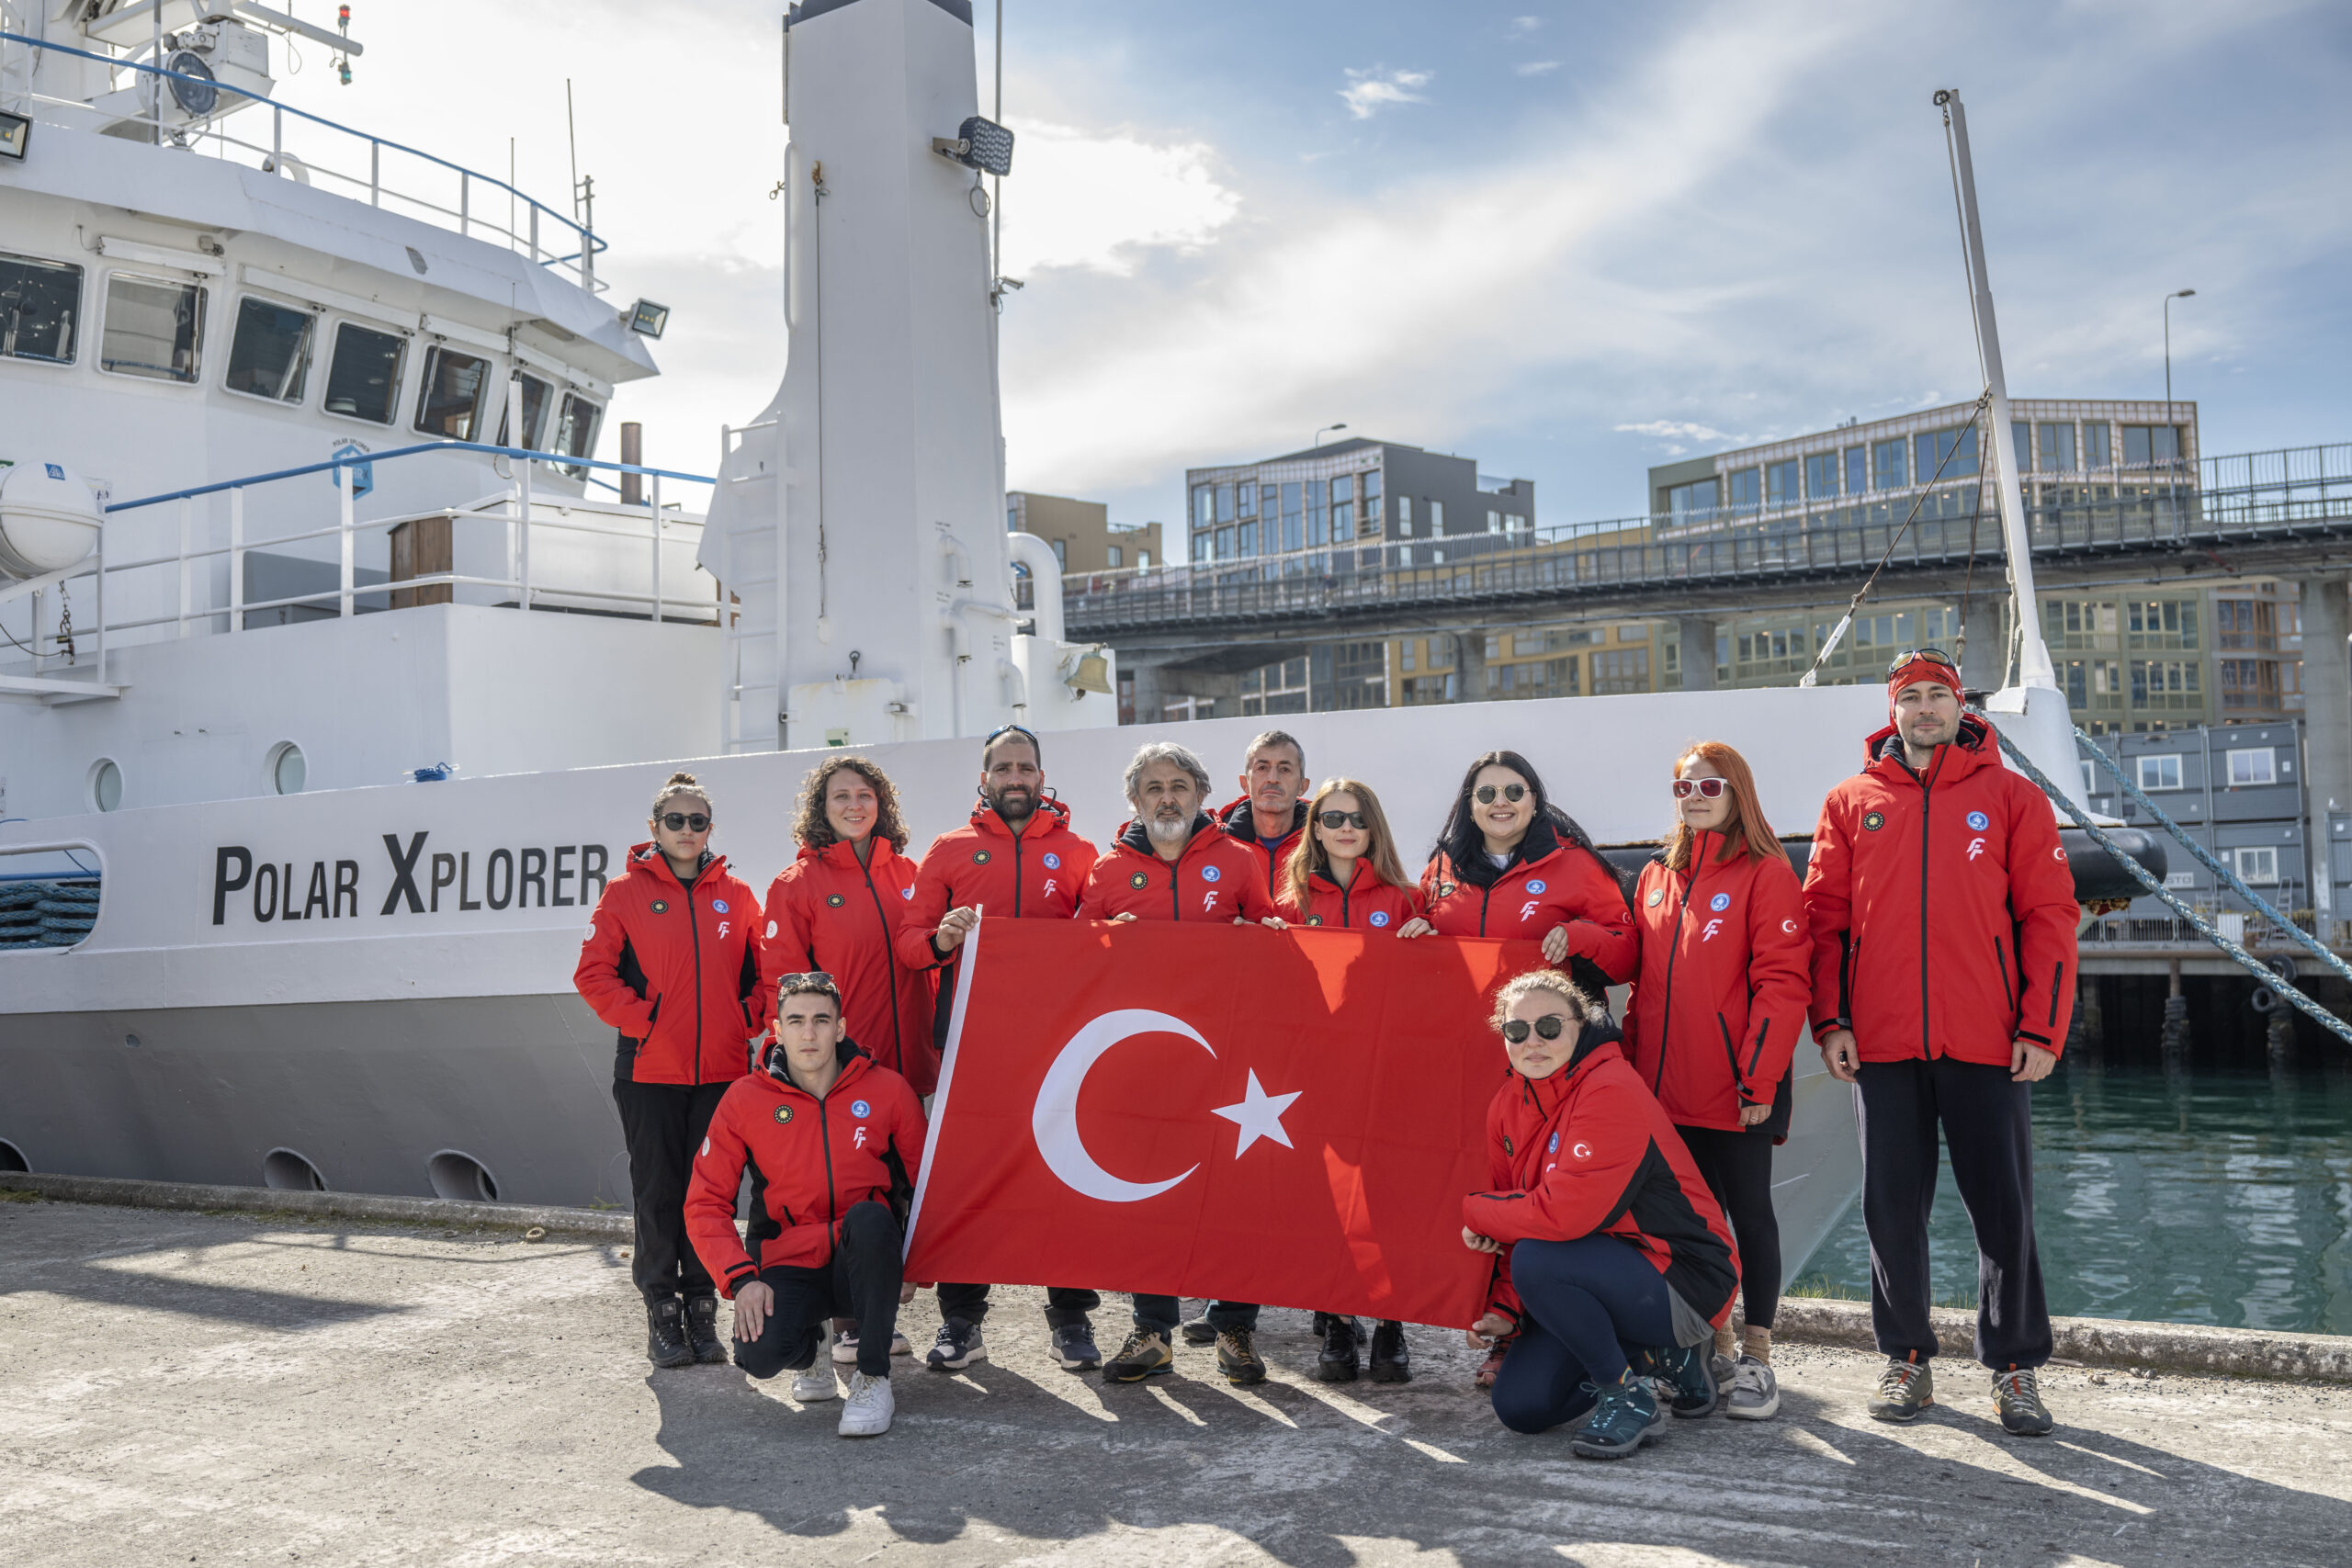 Türkiye's 4th Arctic research expedition team arrives in Tromso